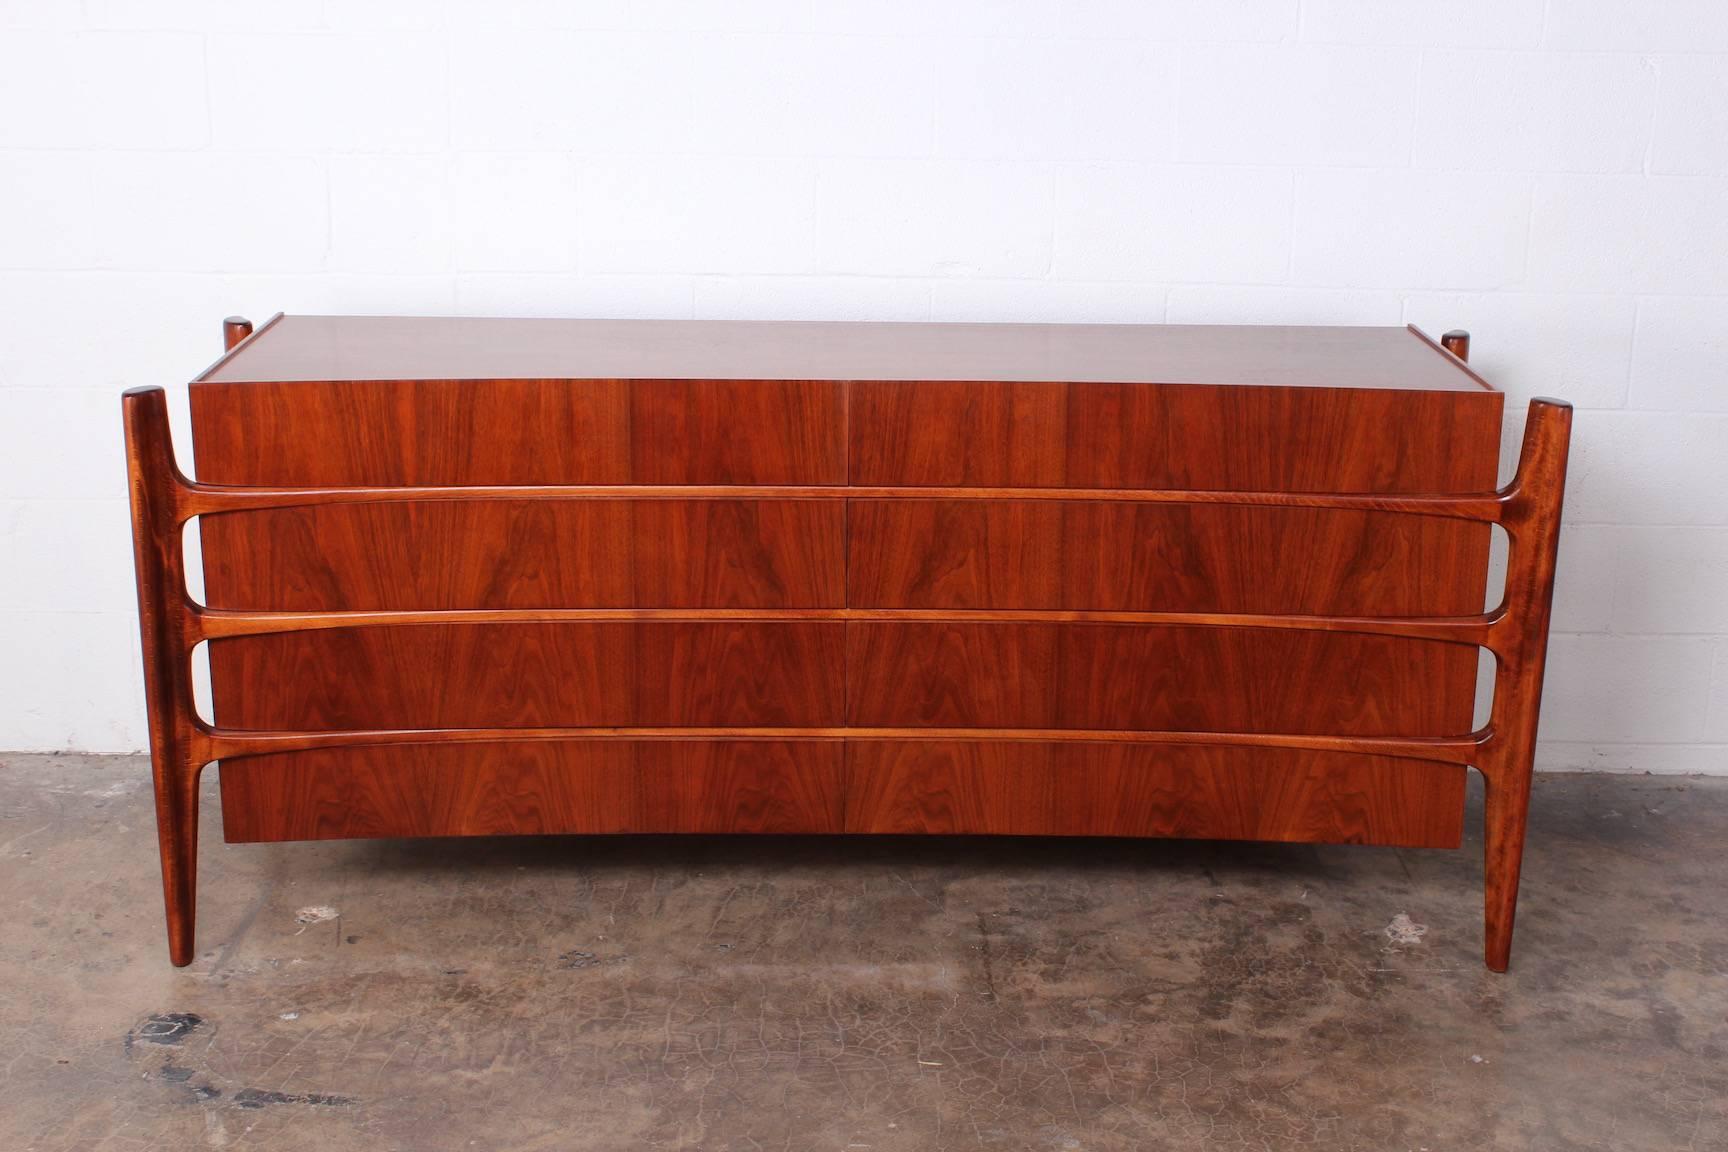 A sculptural walnut eight-drawer dresser designed by William Hinn and made in Sweden by Swedish furniture guild for Urban Furniture.